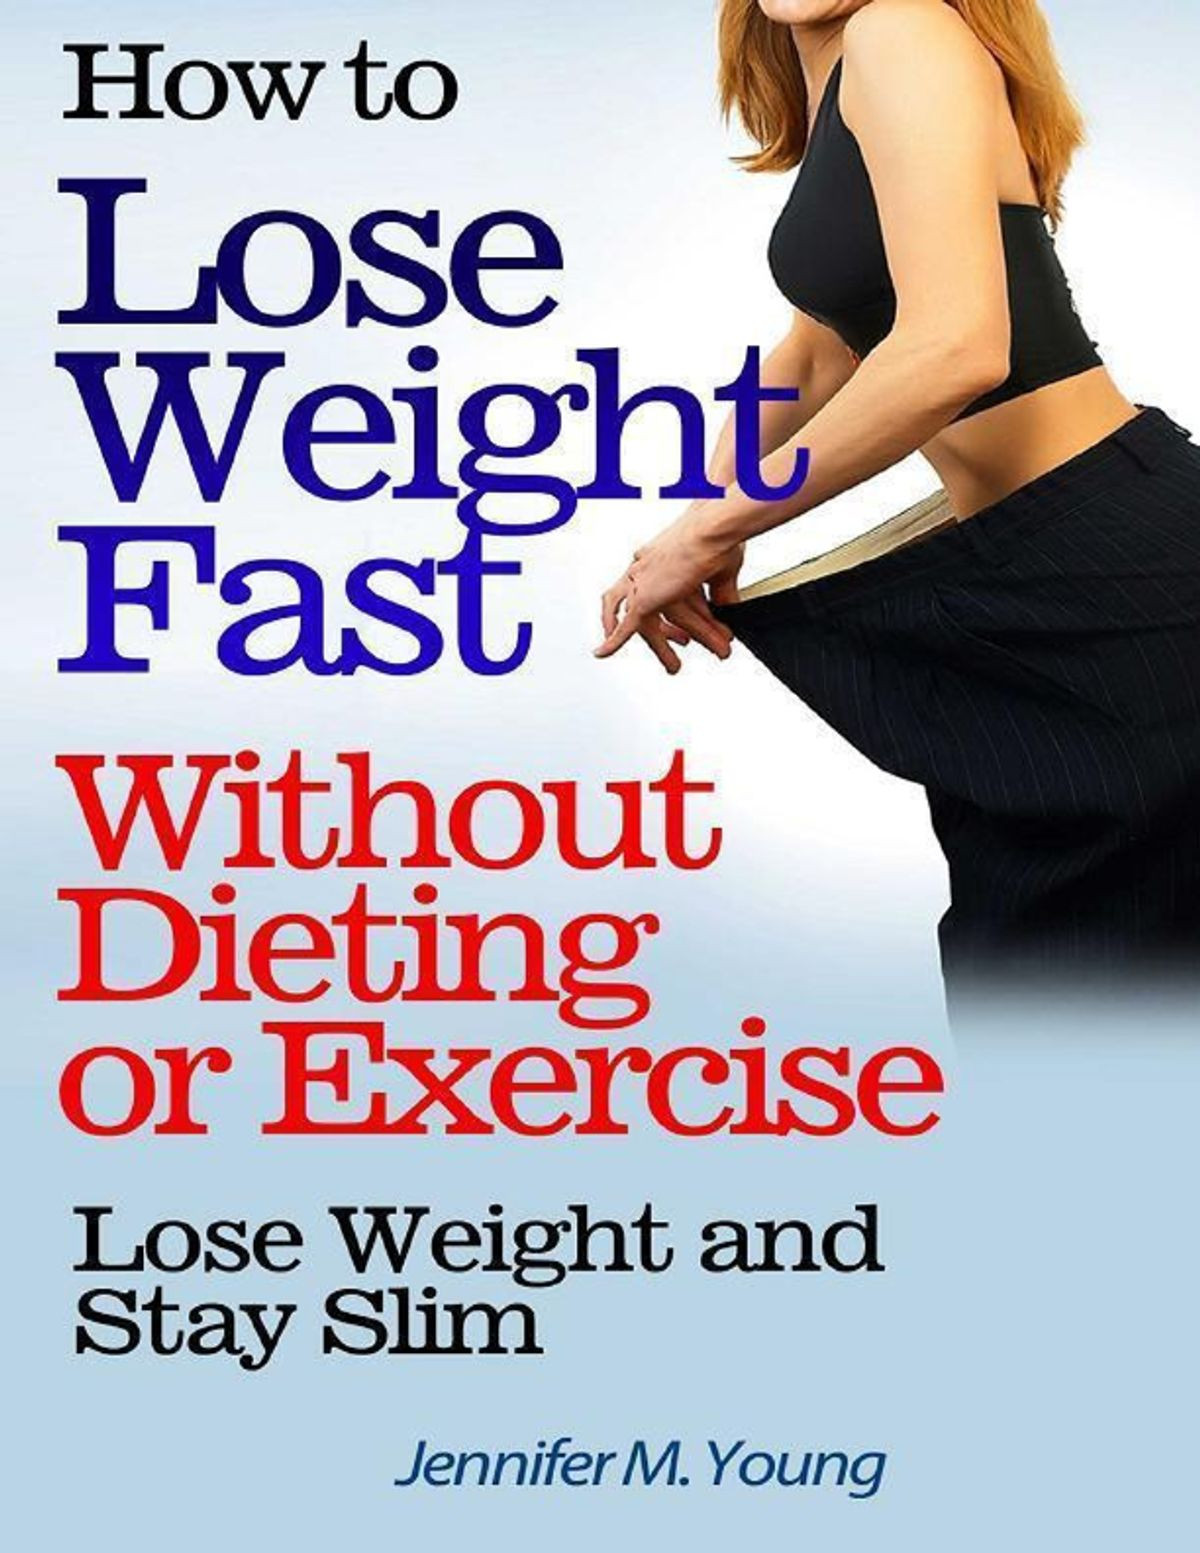 How To Lose Weight Super Fast
 How to Lose Weight Fast Without Dieting or Exercise Lose